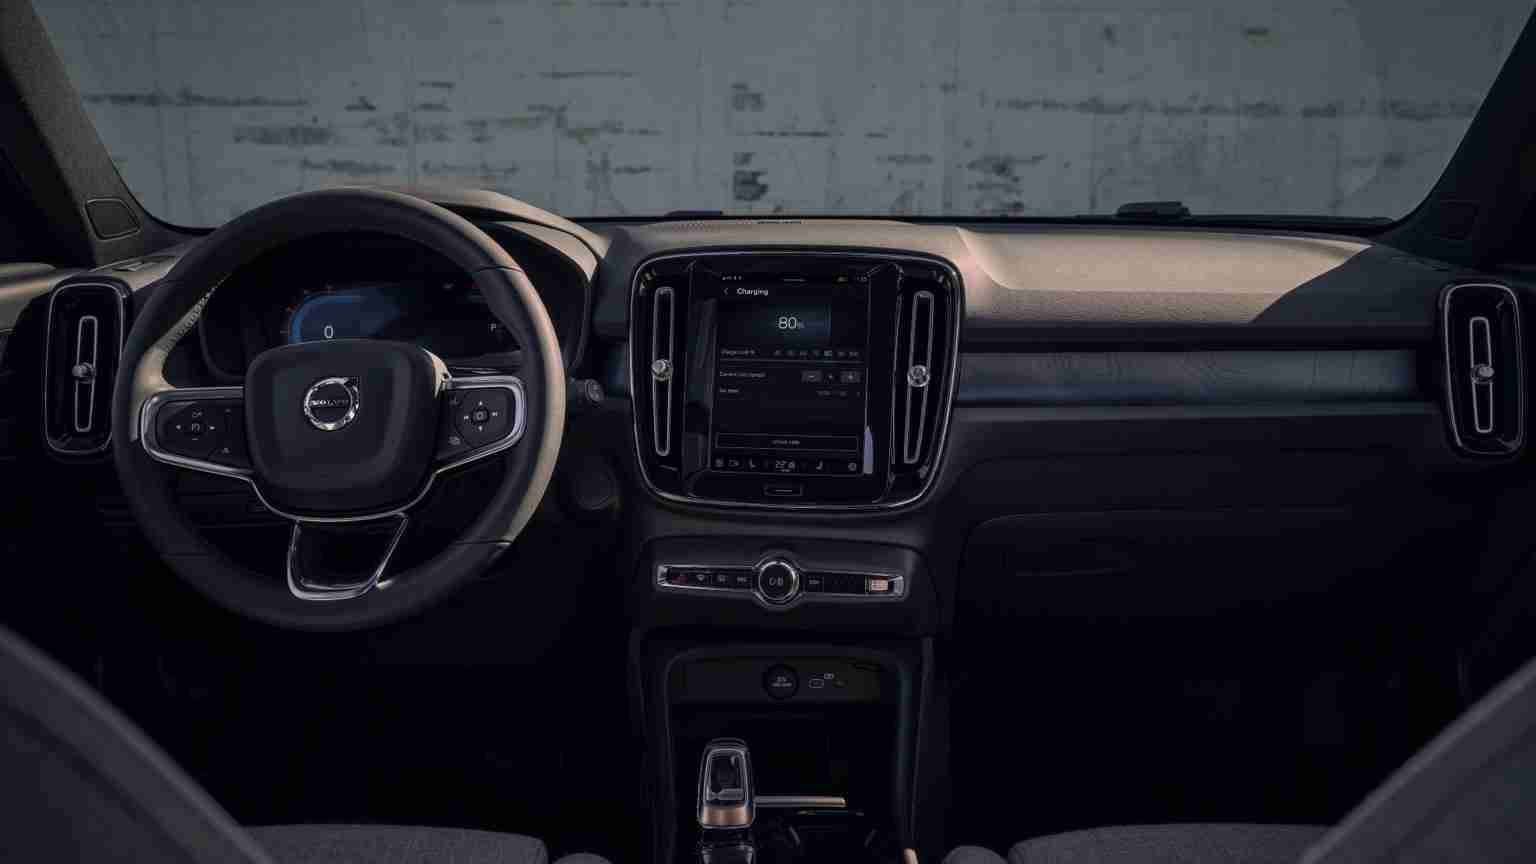 New Volvo XC40 Recharge Pure Electric